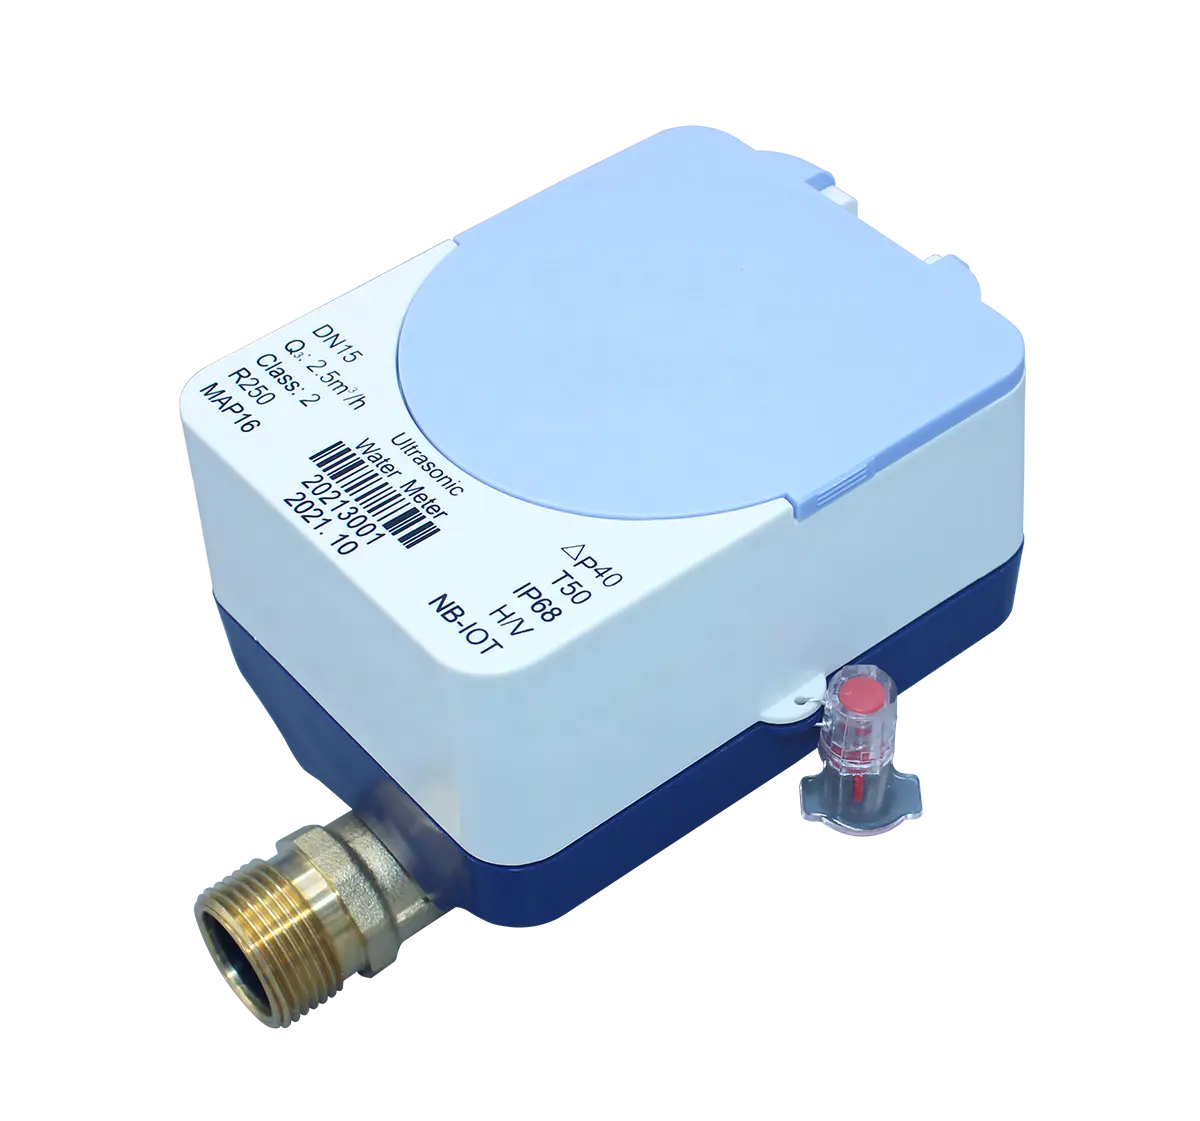 Ultrasonic water meter with wired Mbus communication EN1434 or CJ188 protocol Mbus master